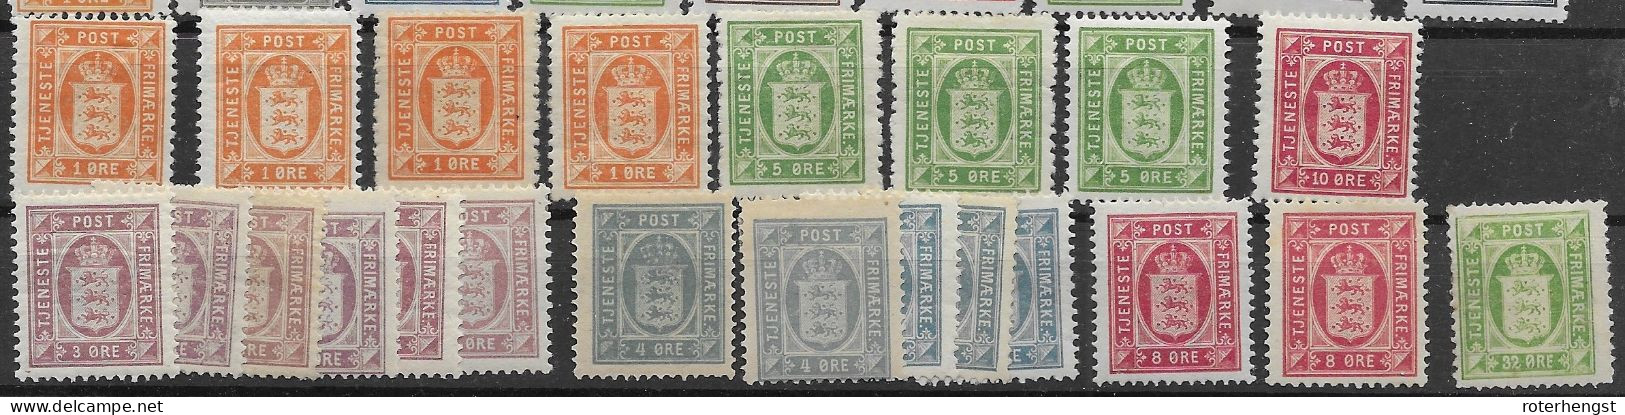 Denmark Officials Collection Mh* Some Are Mnh ** Different Perfs Wtm And Shades Over 200 Euros - Dienstmarken